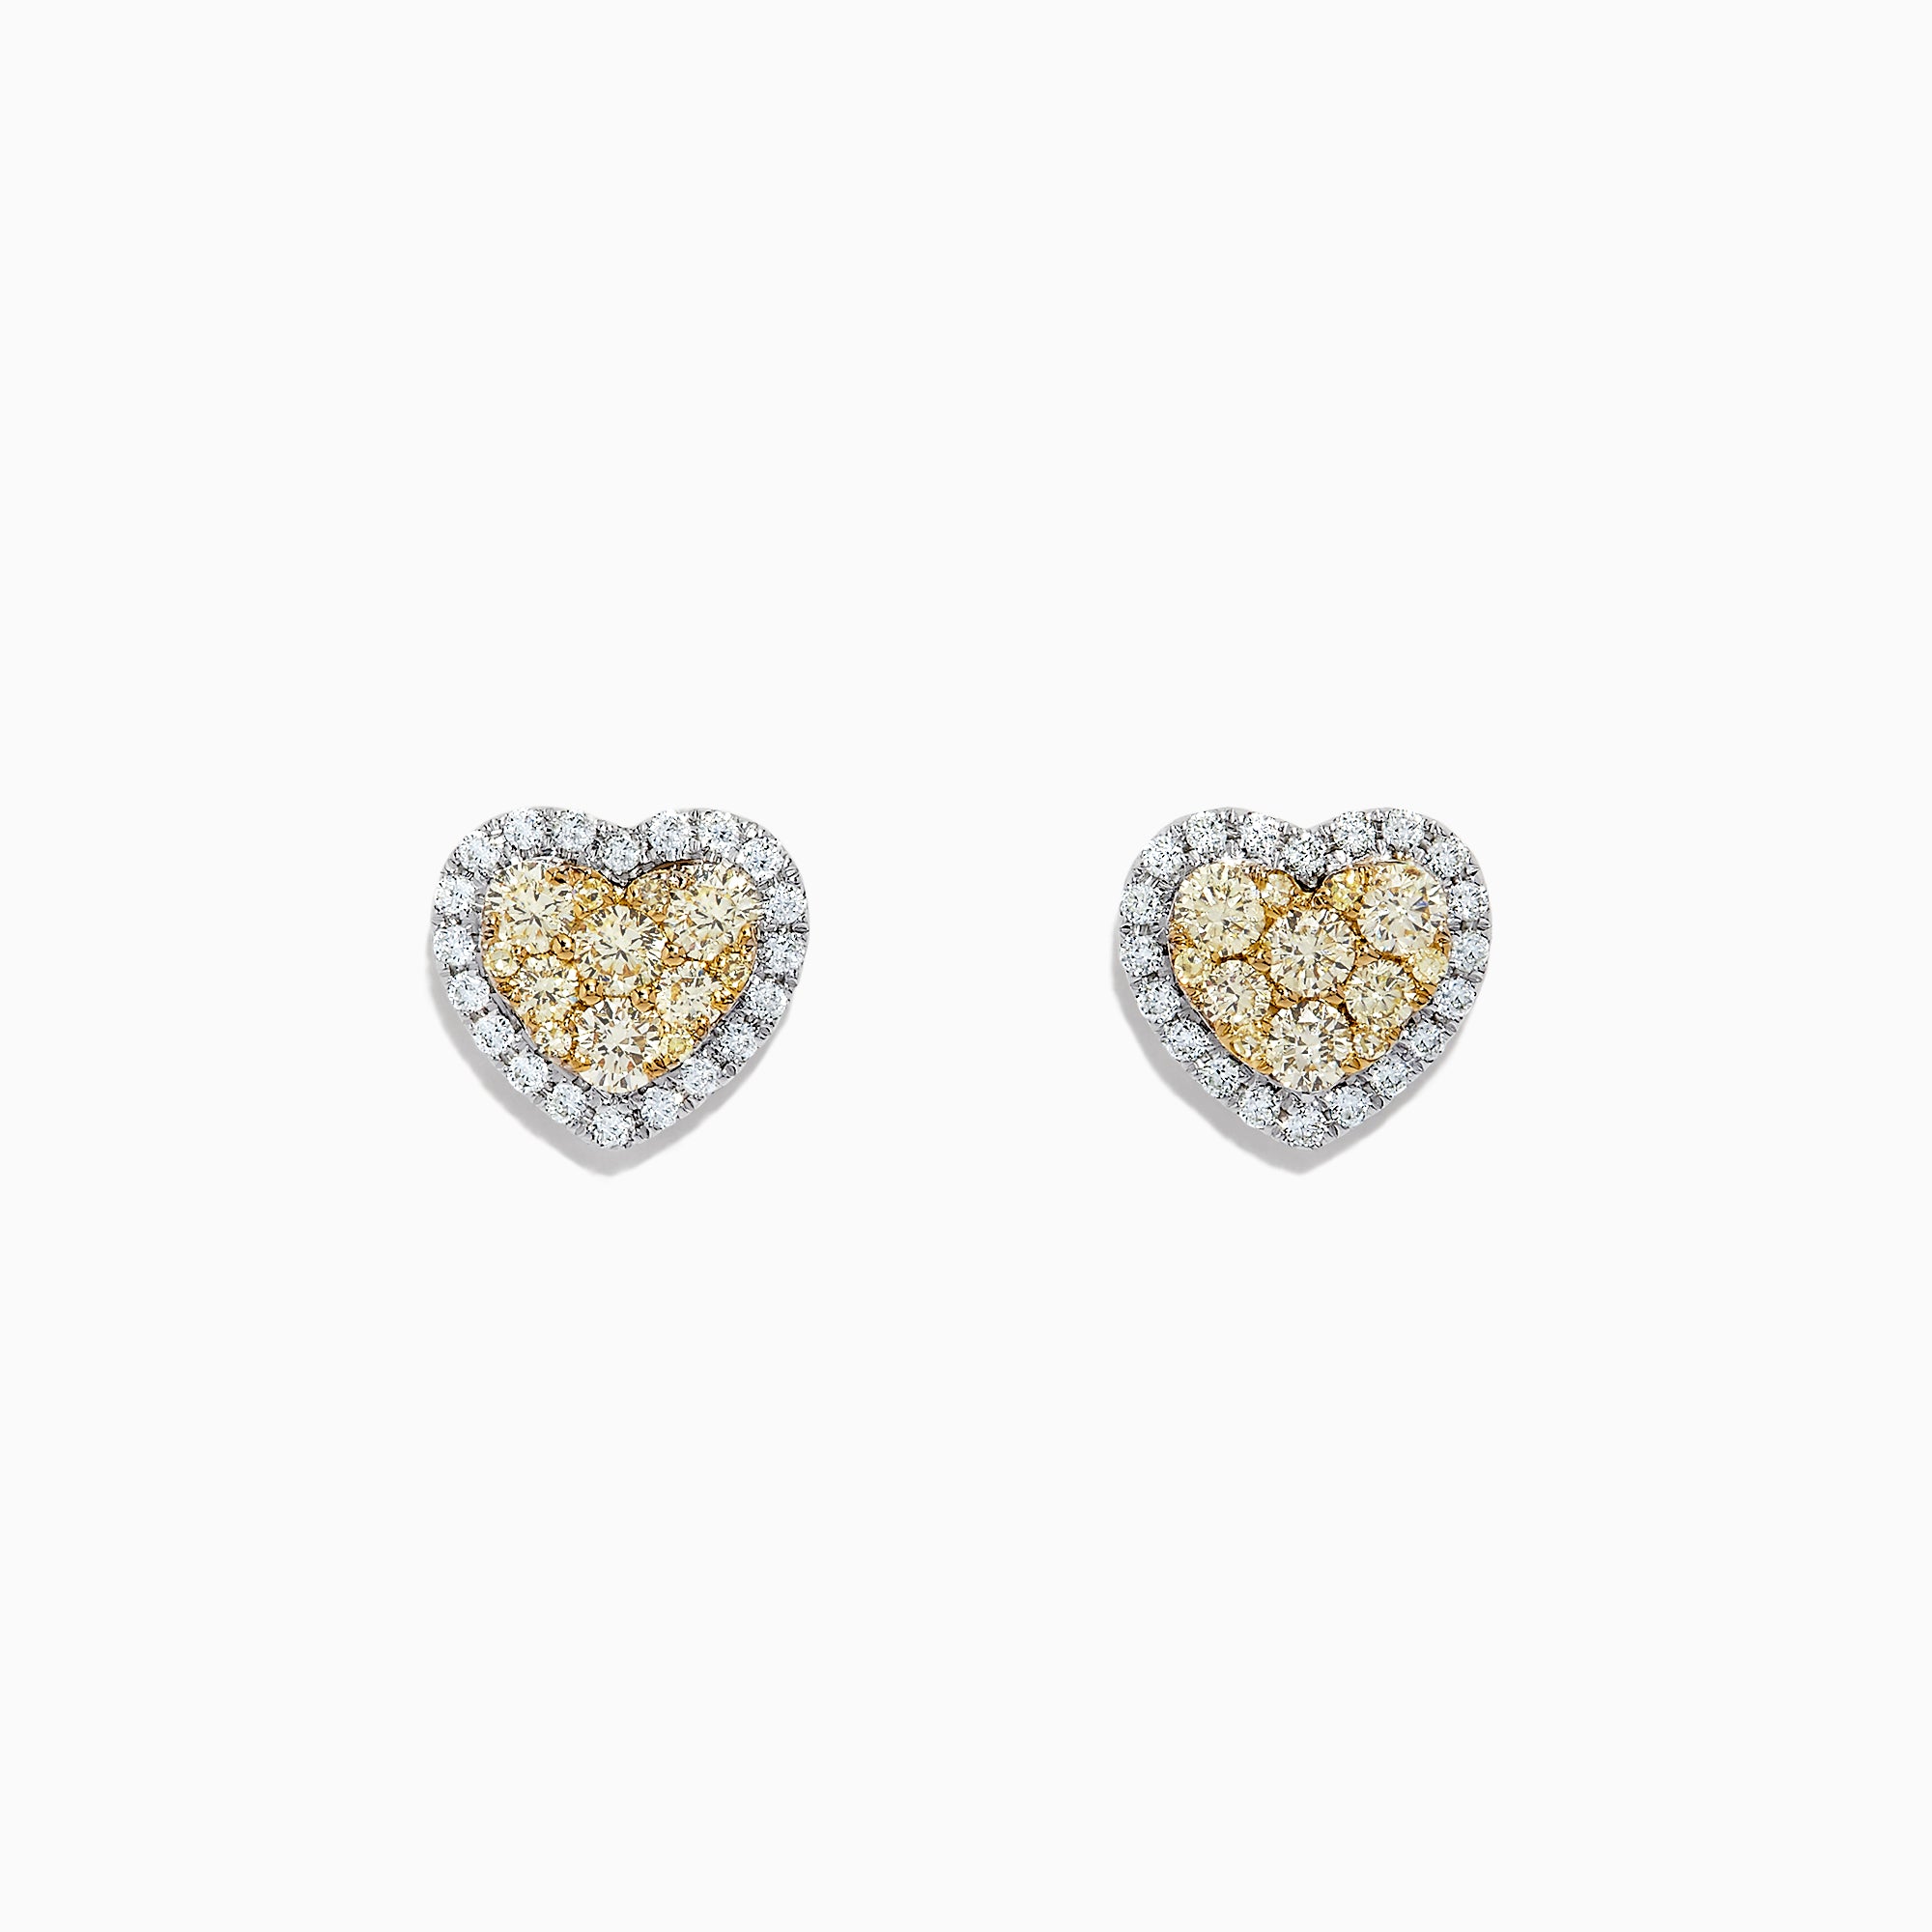 Effy Canare 14K Two Tone Gold Yellow and White Diamond Heart Earrings, 0.96 TCW